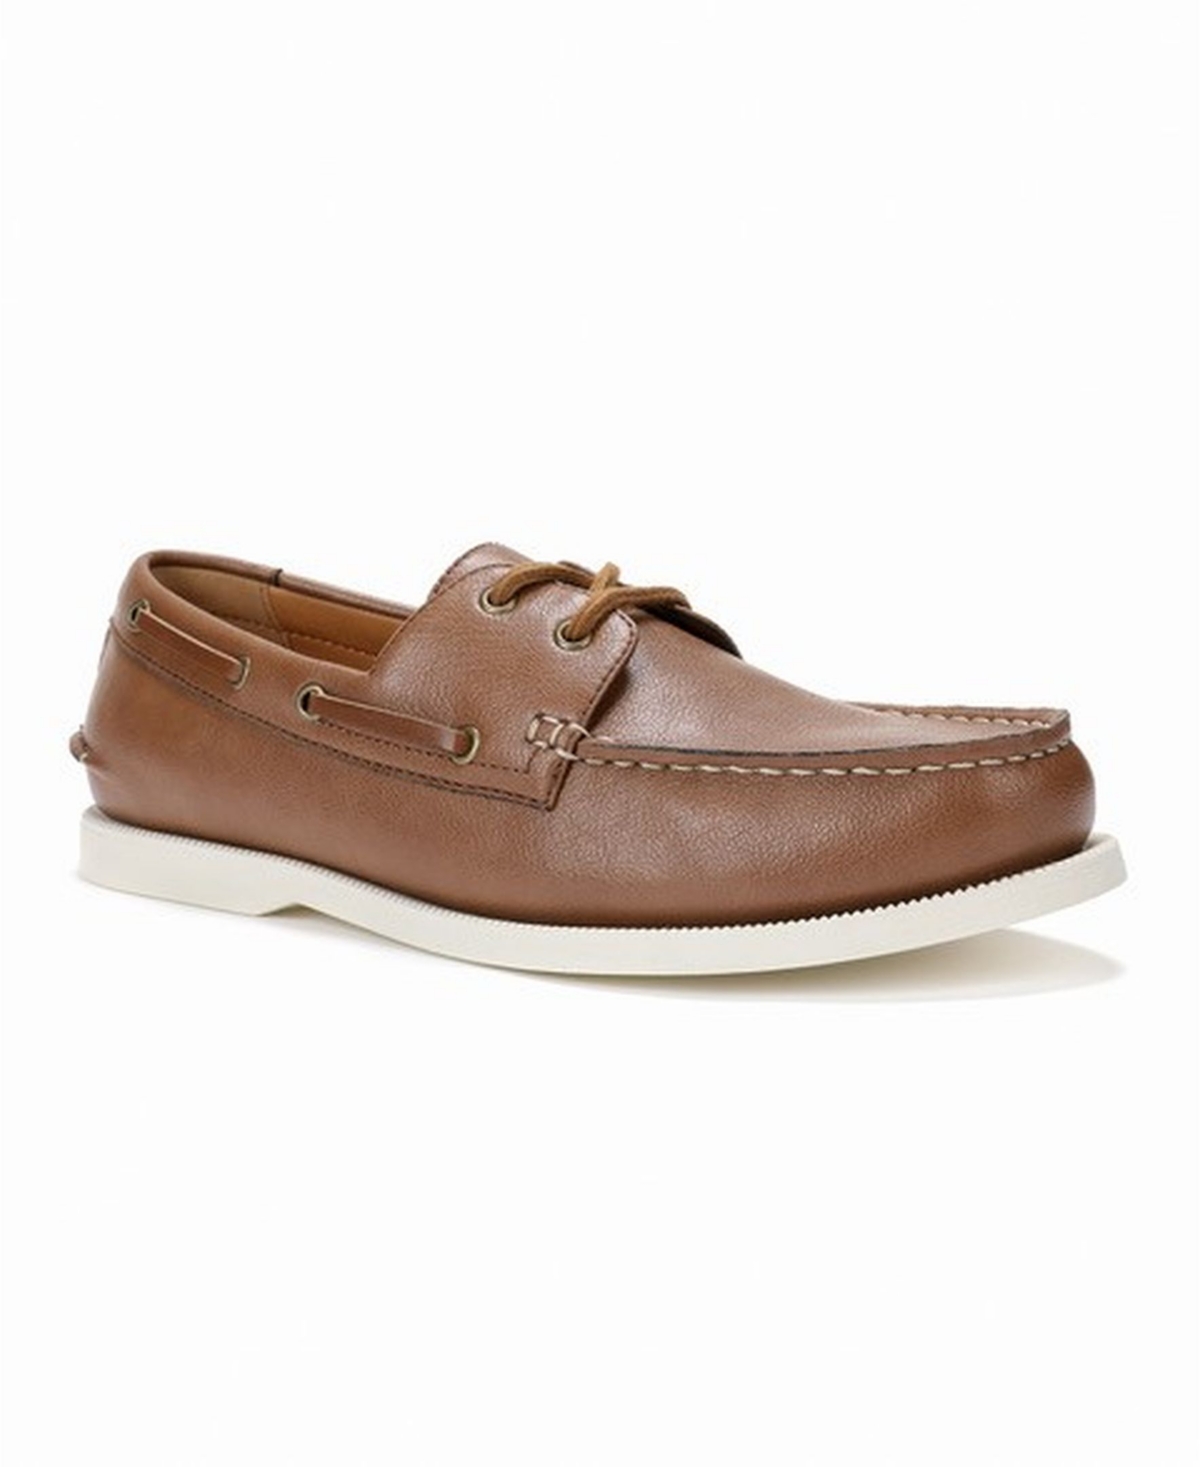 CLUB ROOM MEN'S BOAT SHOES, CREATED FOR MACY'S MEN'S SHOES